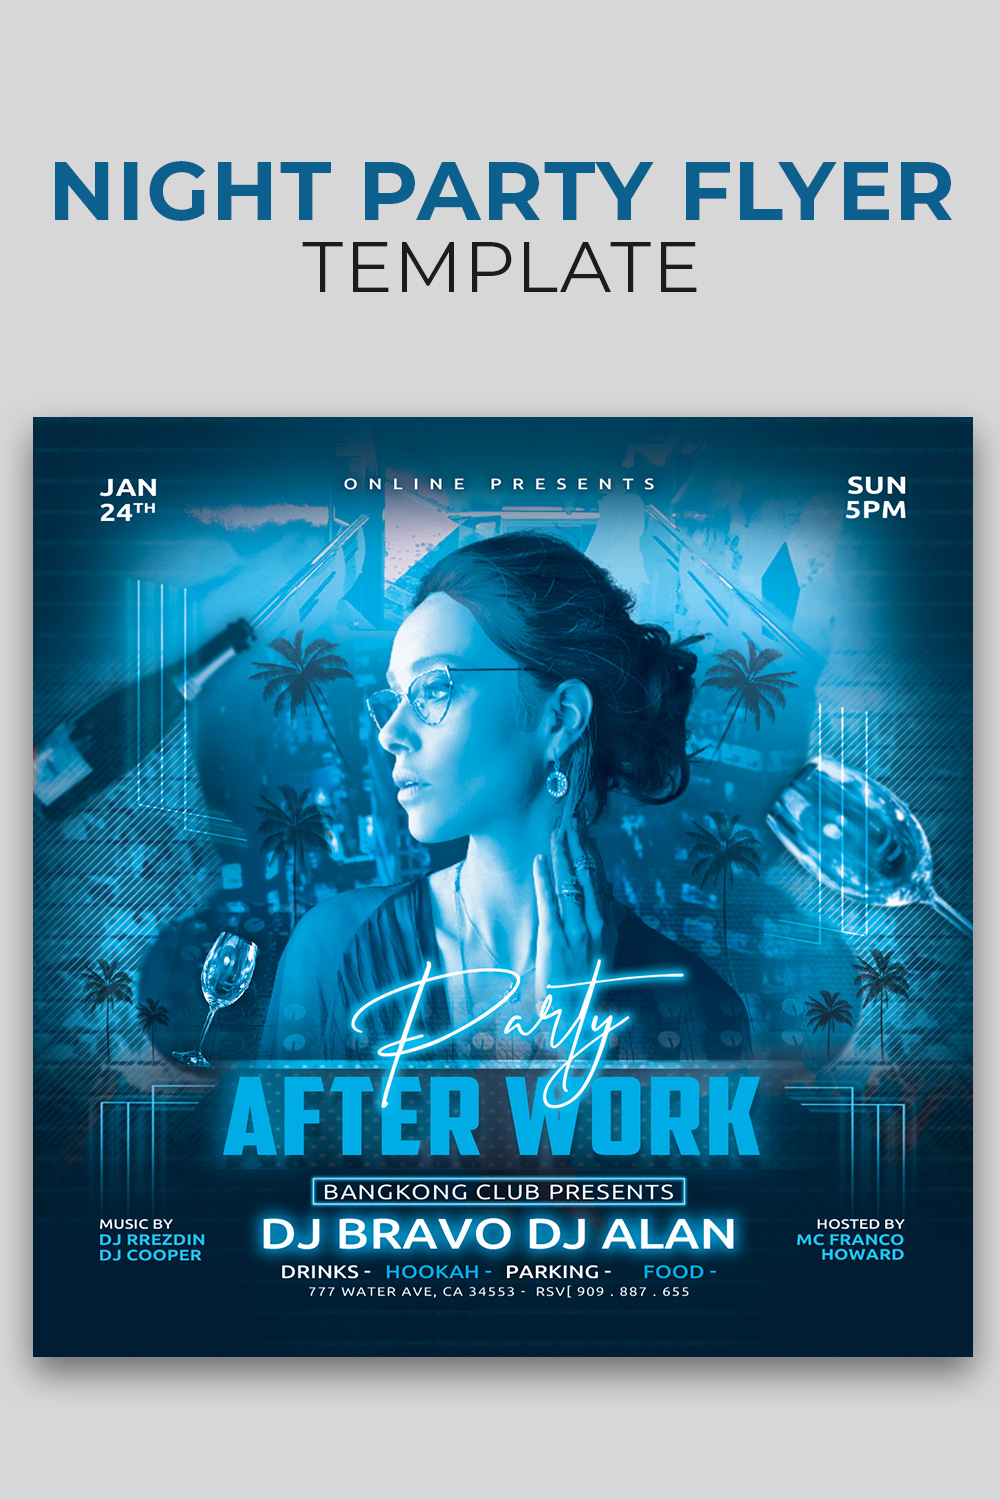 Ladis dj night Party Flyer Template / Instagram Banner psd pinterest preview image.